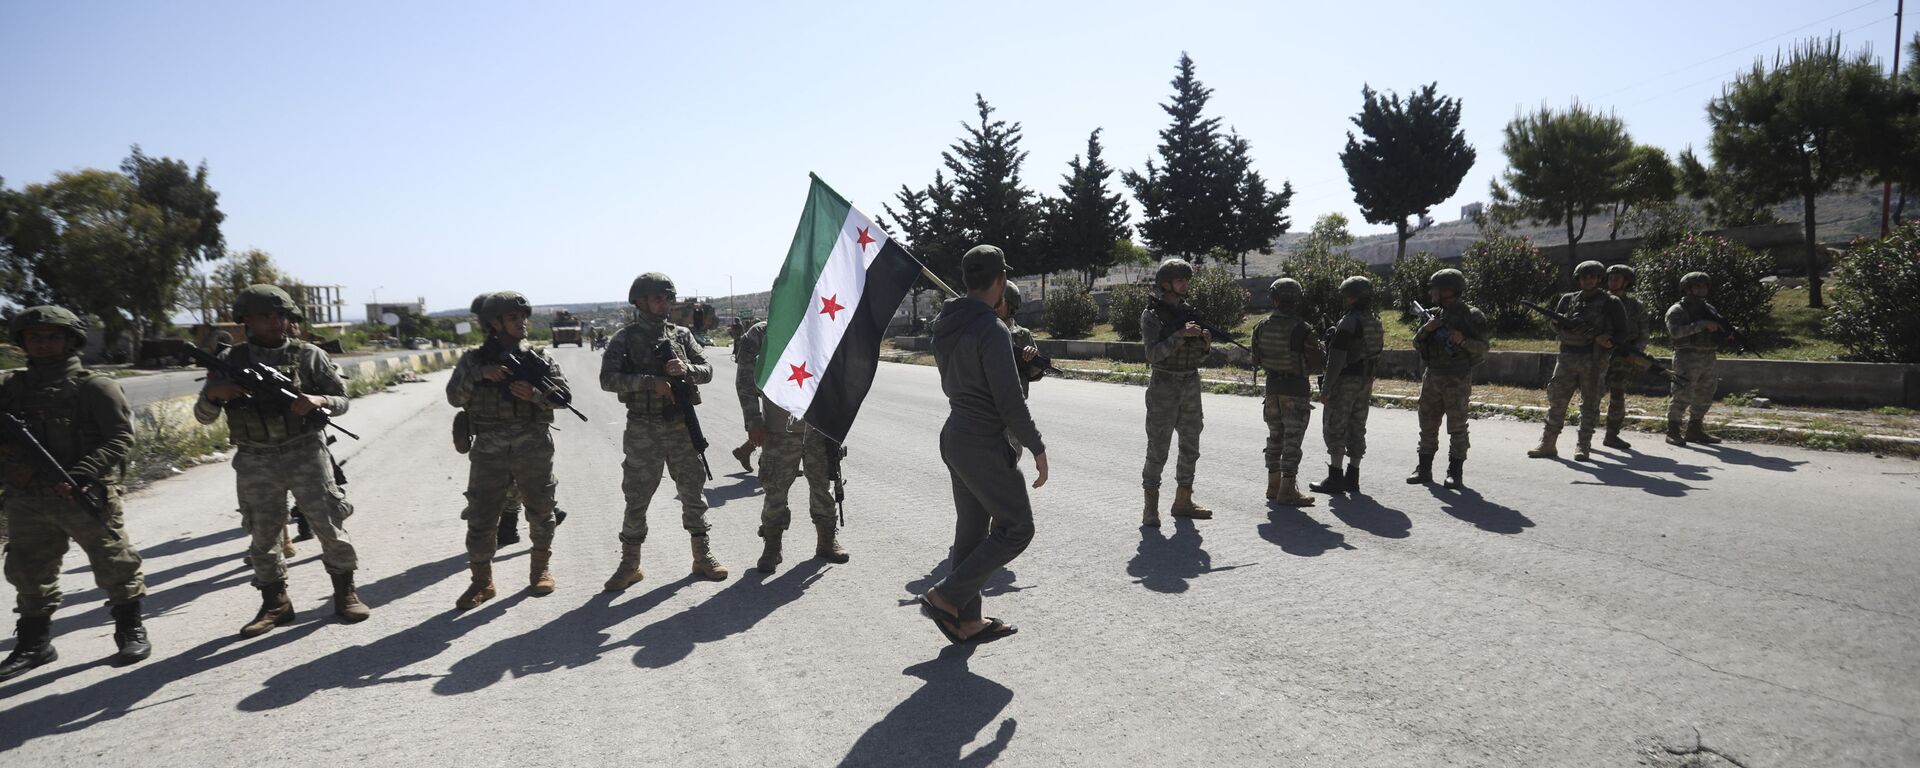 A man carries Syrian Independence flag as Turkish soldiers block a road after a nearby explosion outside the city of Ariha, in Idlib province, Syria, Tuesday, May 12, 2020 - Sputnik International, 1920, 30.10.2021